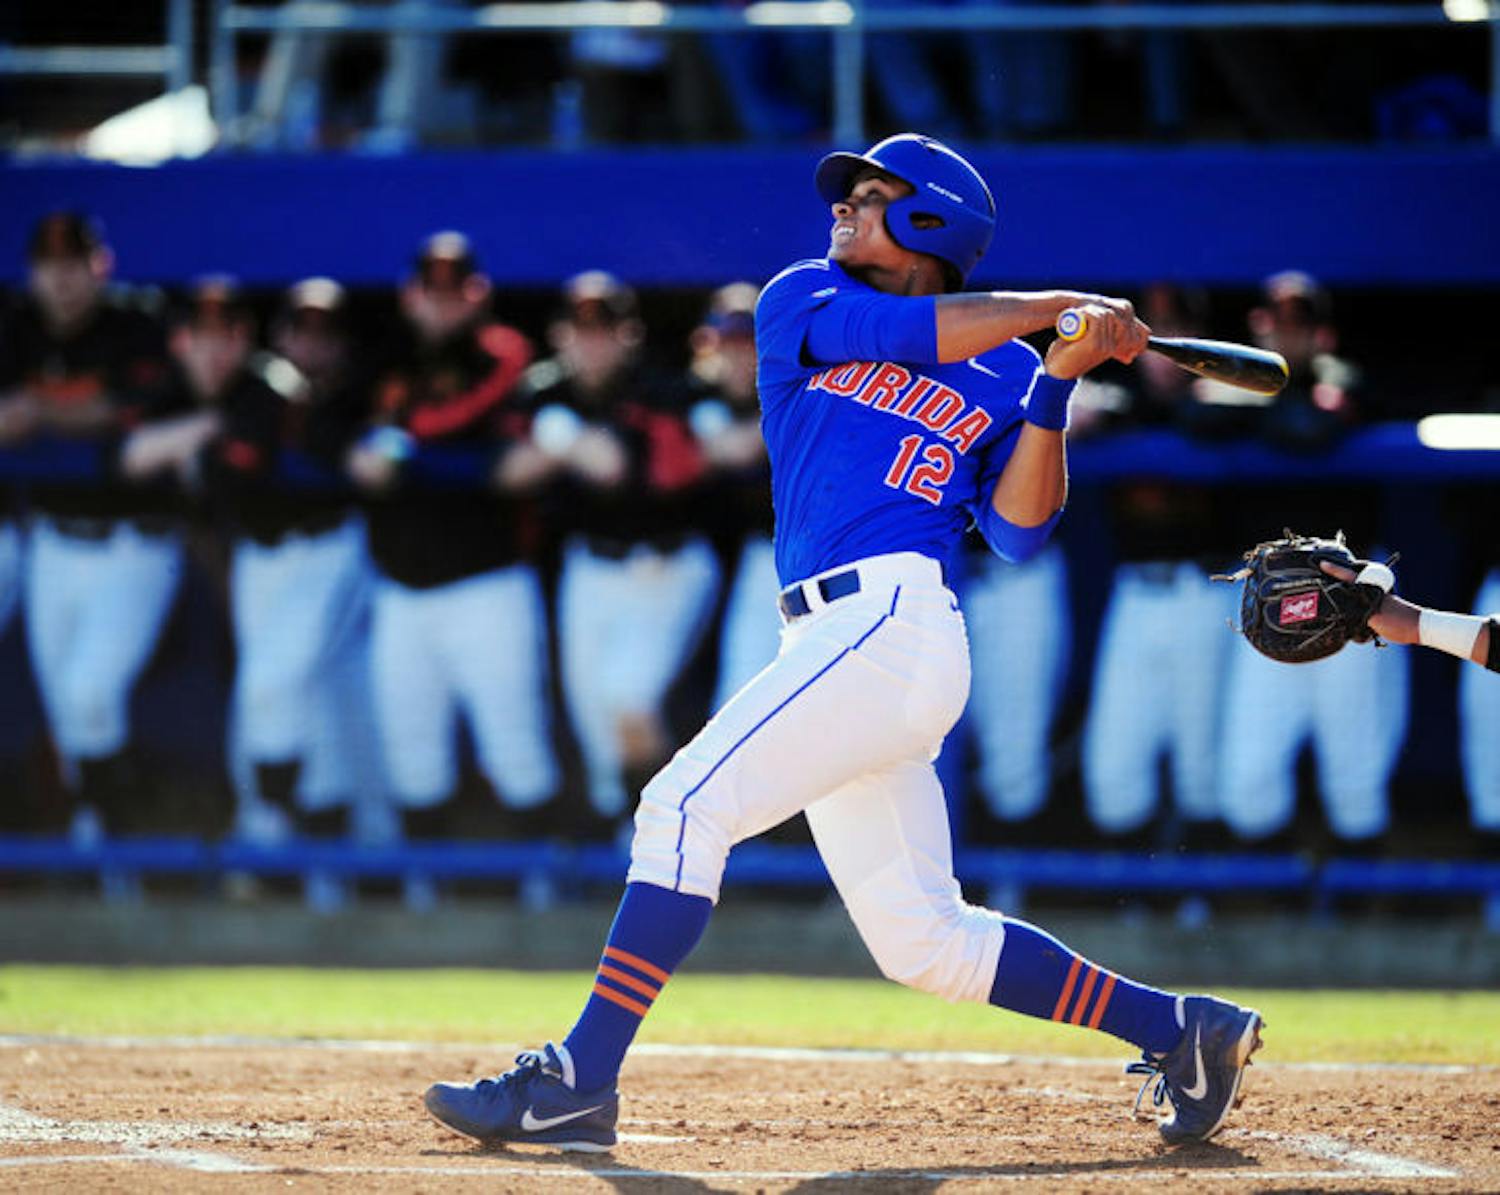 Richie Martin hits during Florida’s 9-7 loss to Maryland on Saturday at McKethan Stadium. Martin leads the team with a .455 batting average after the Gators’ three-game, season-opening series win.